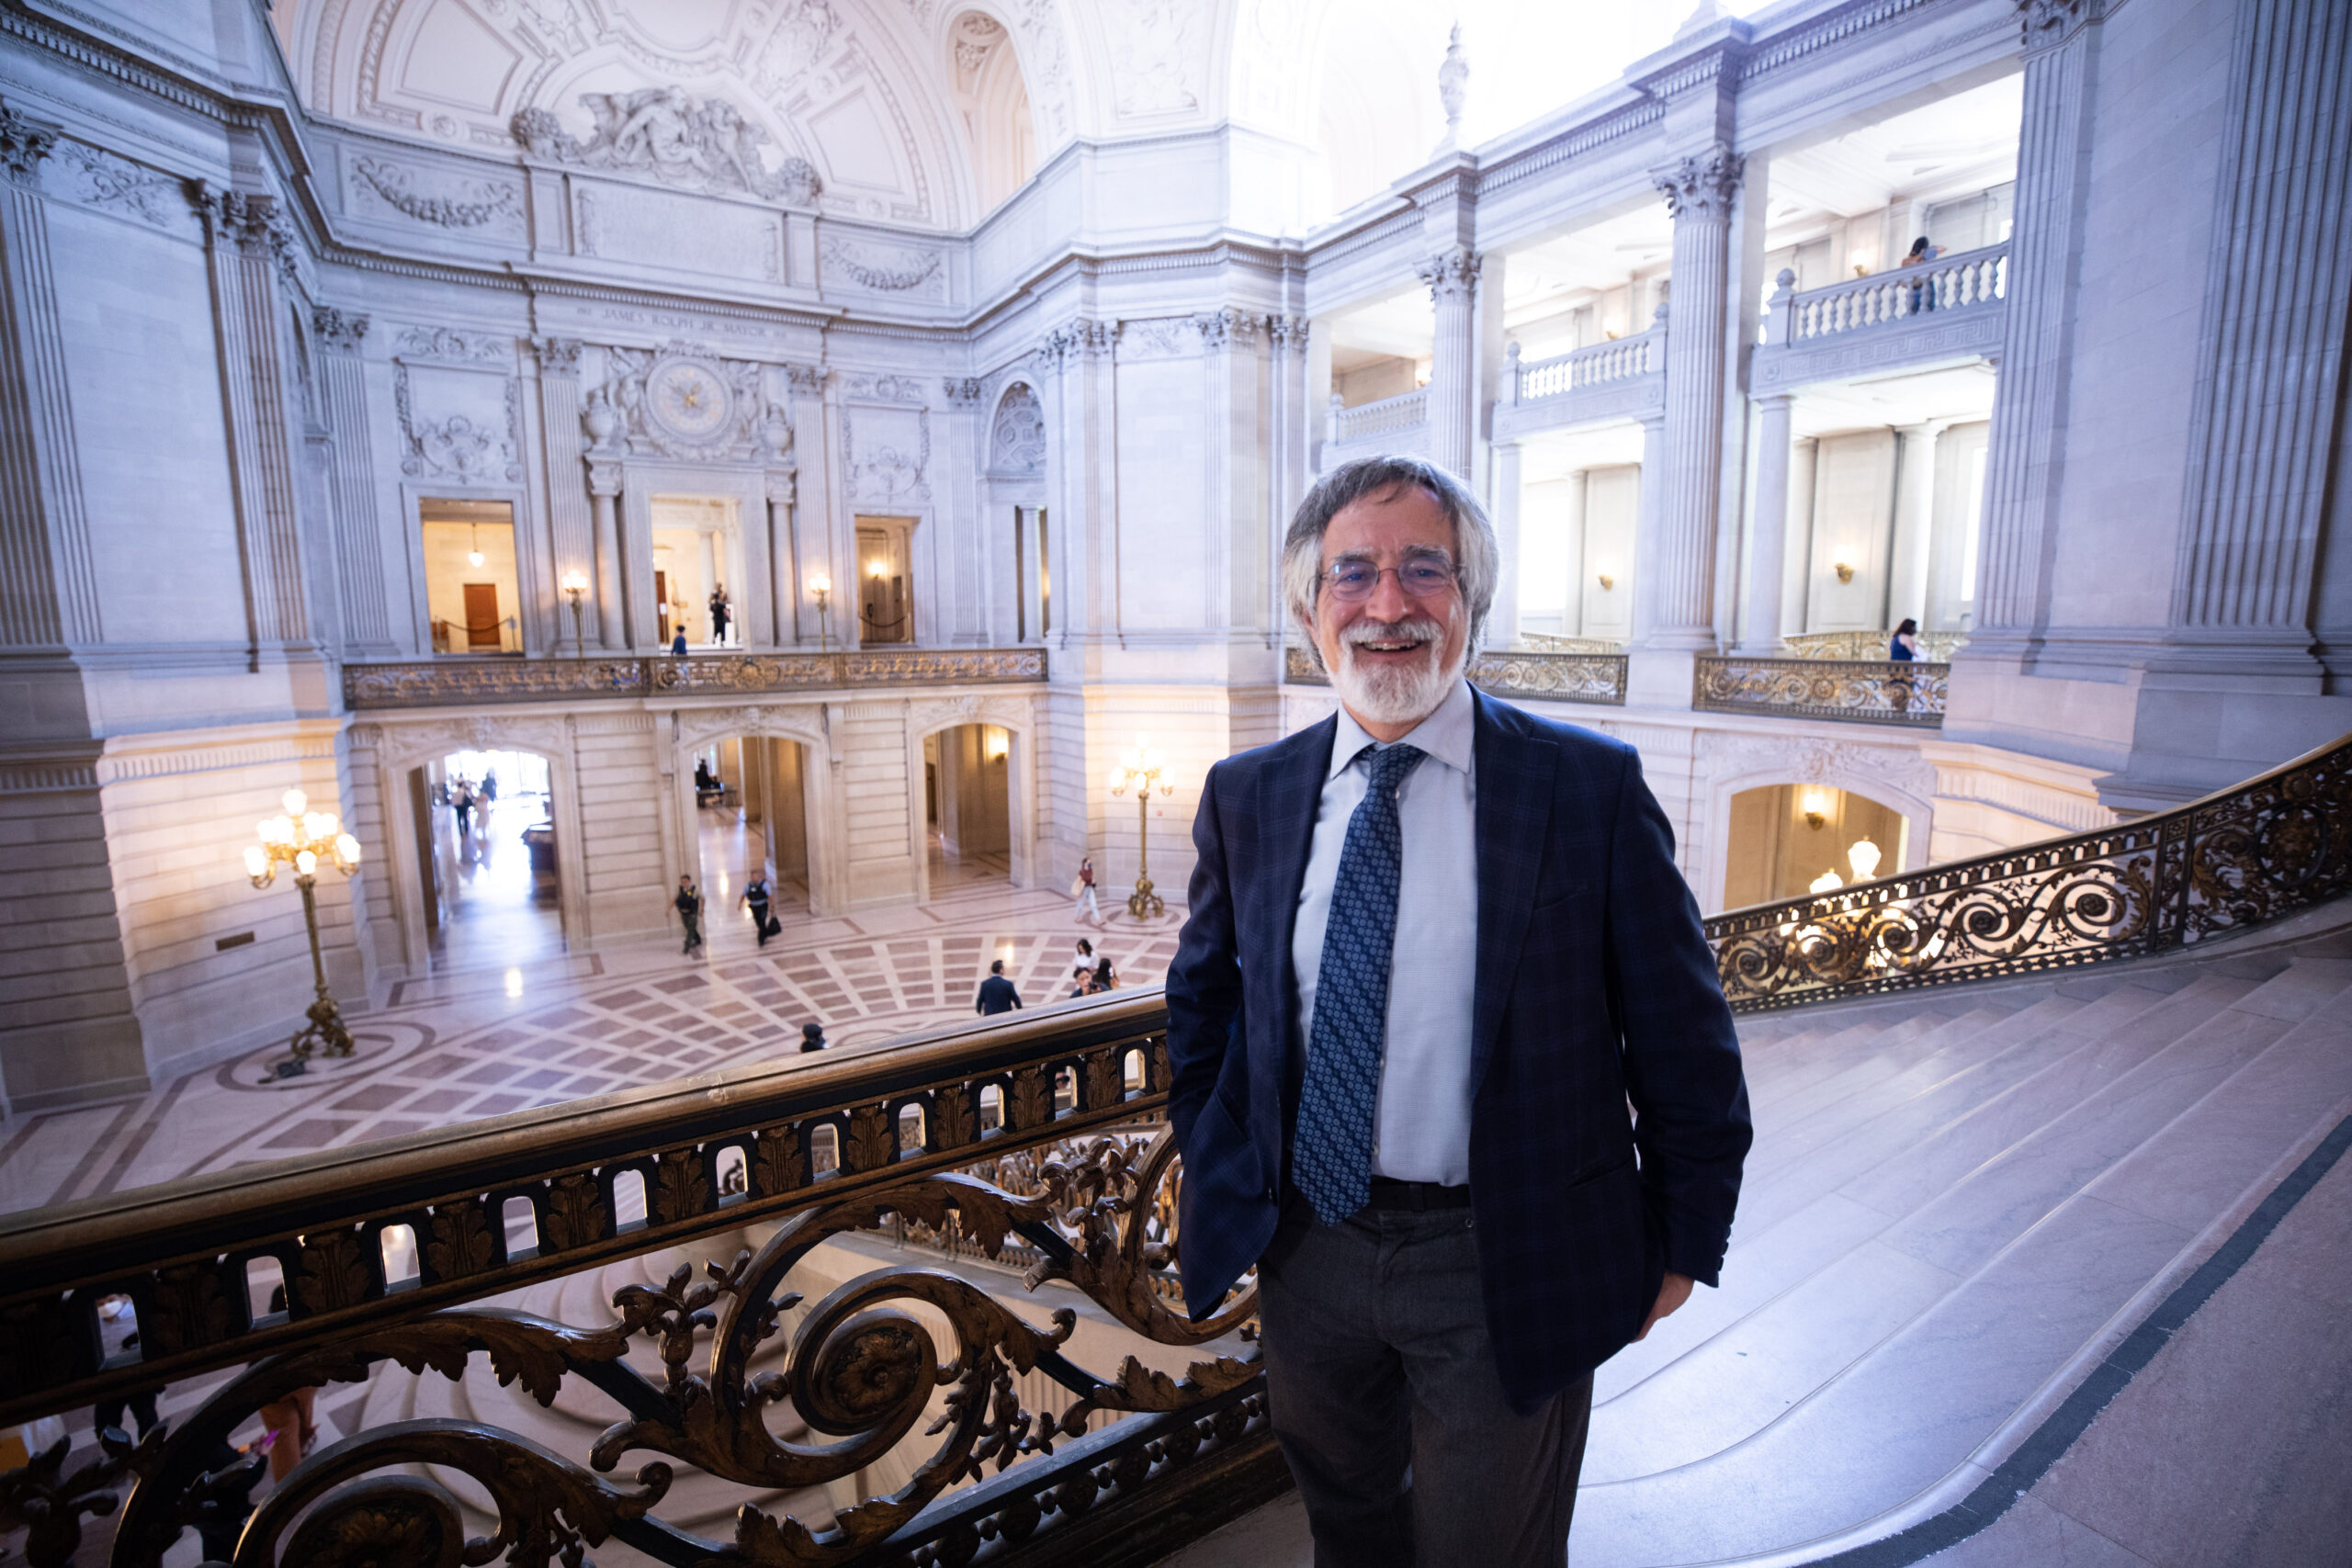 Supervisor Aaron Peskin in a suit stands on an ornate staircase in San Francisco's City Hall.